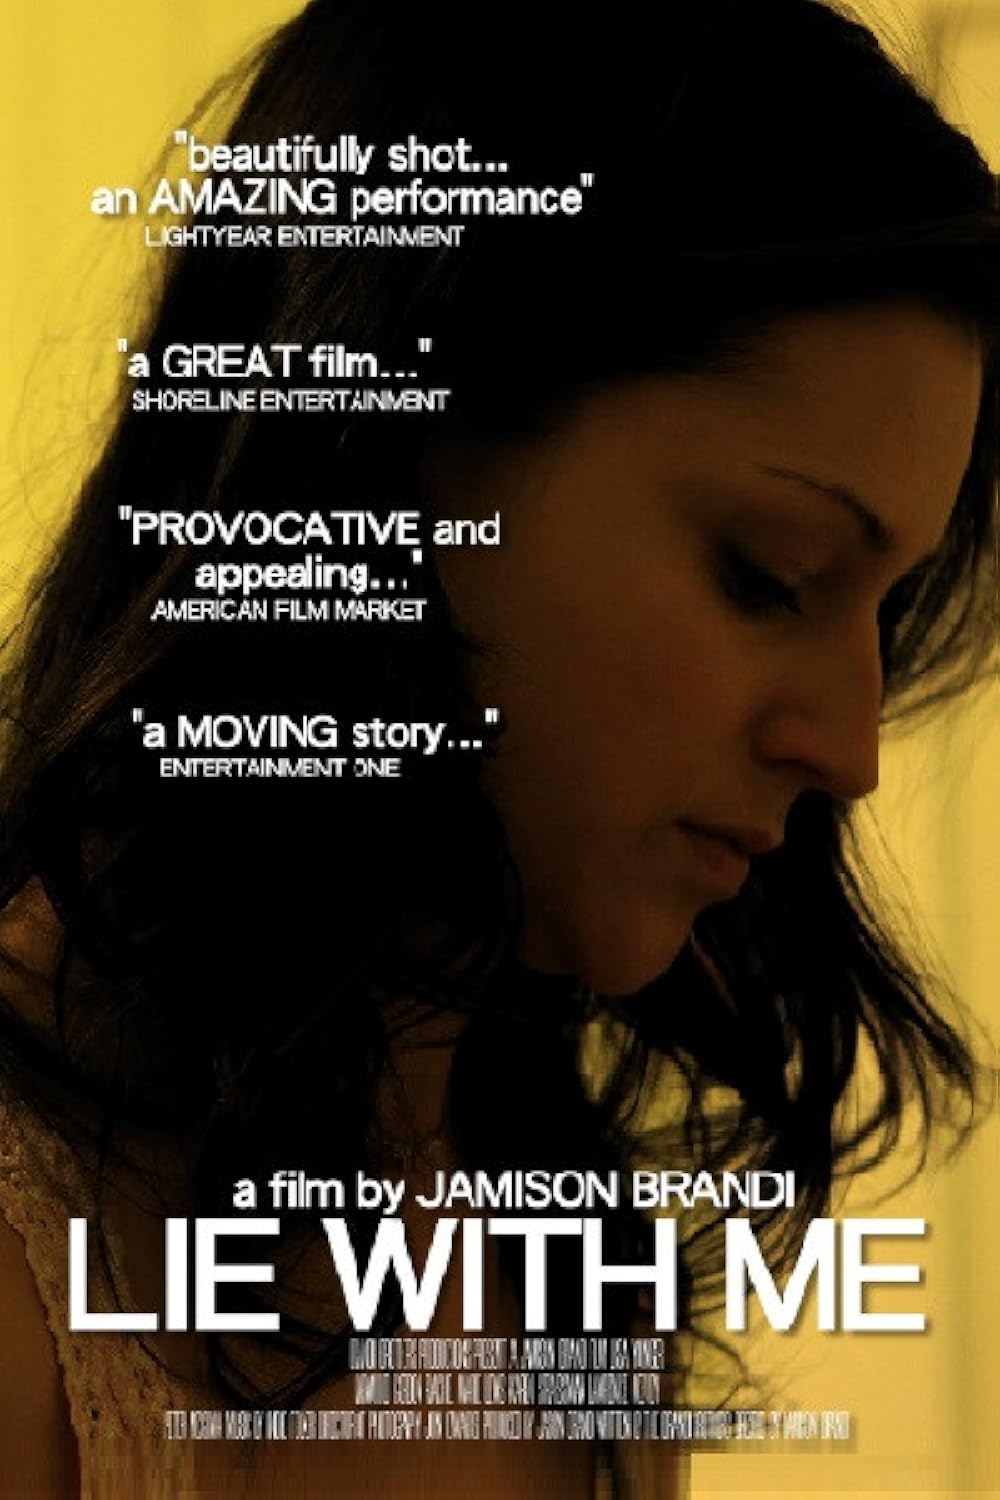 dinah baker recommends Lie With Me Movie Watch